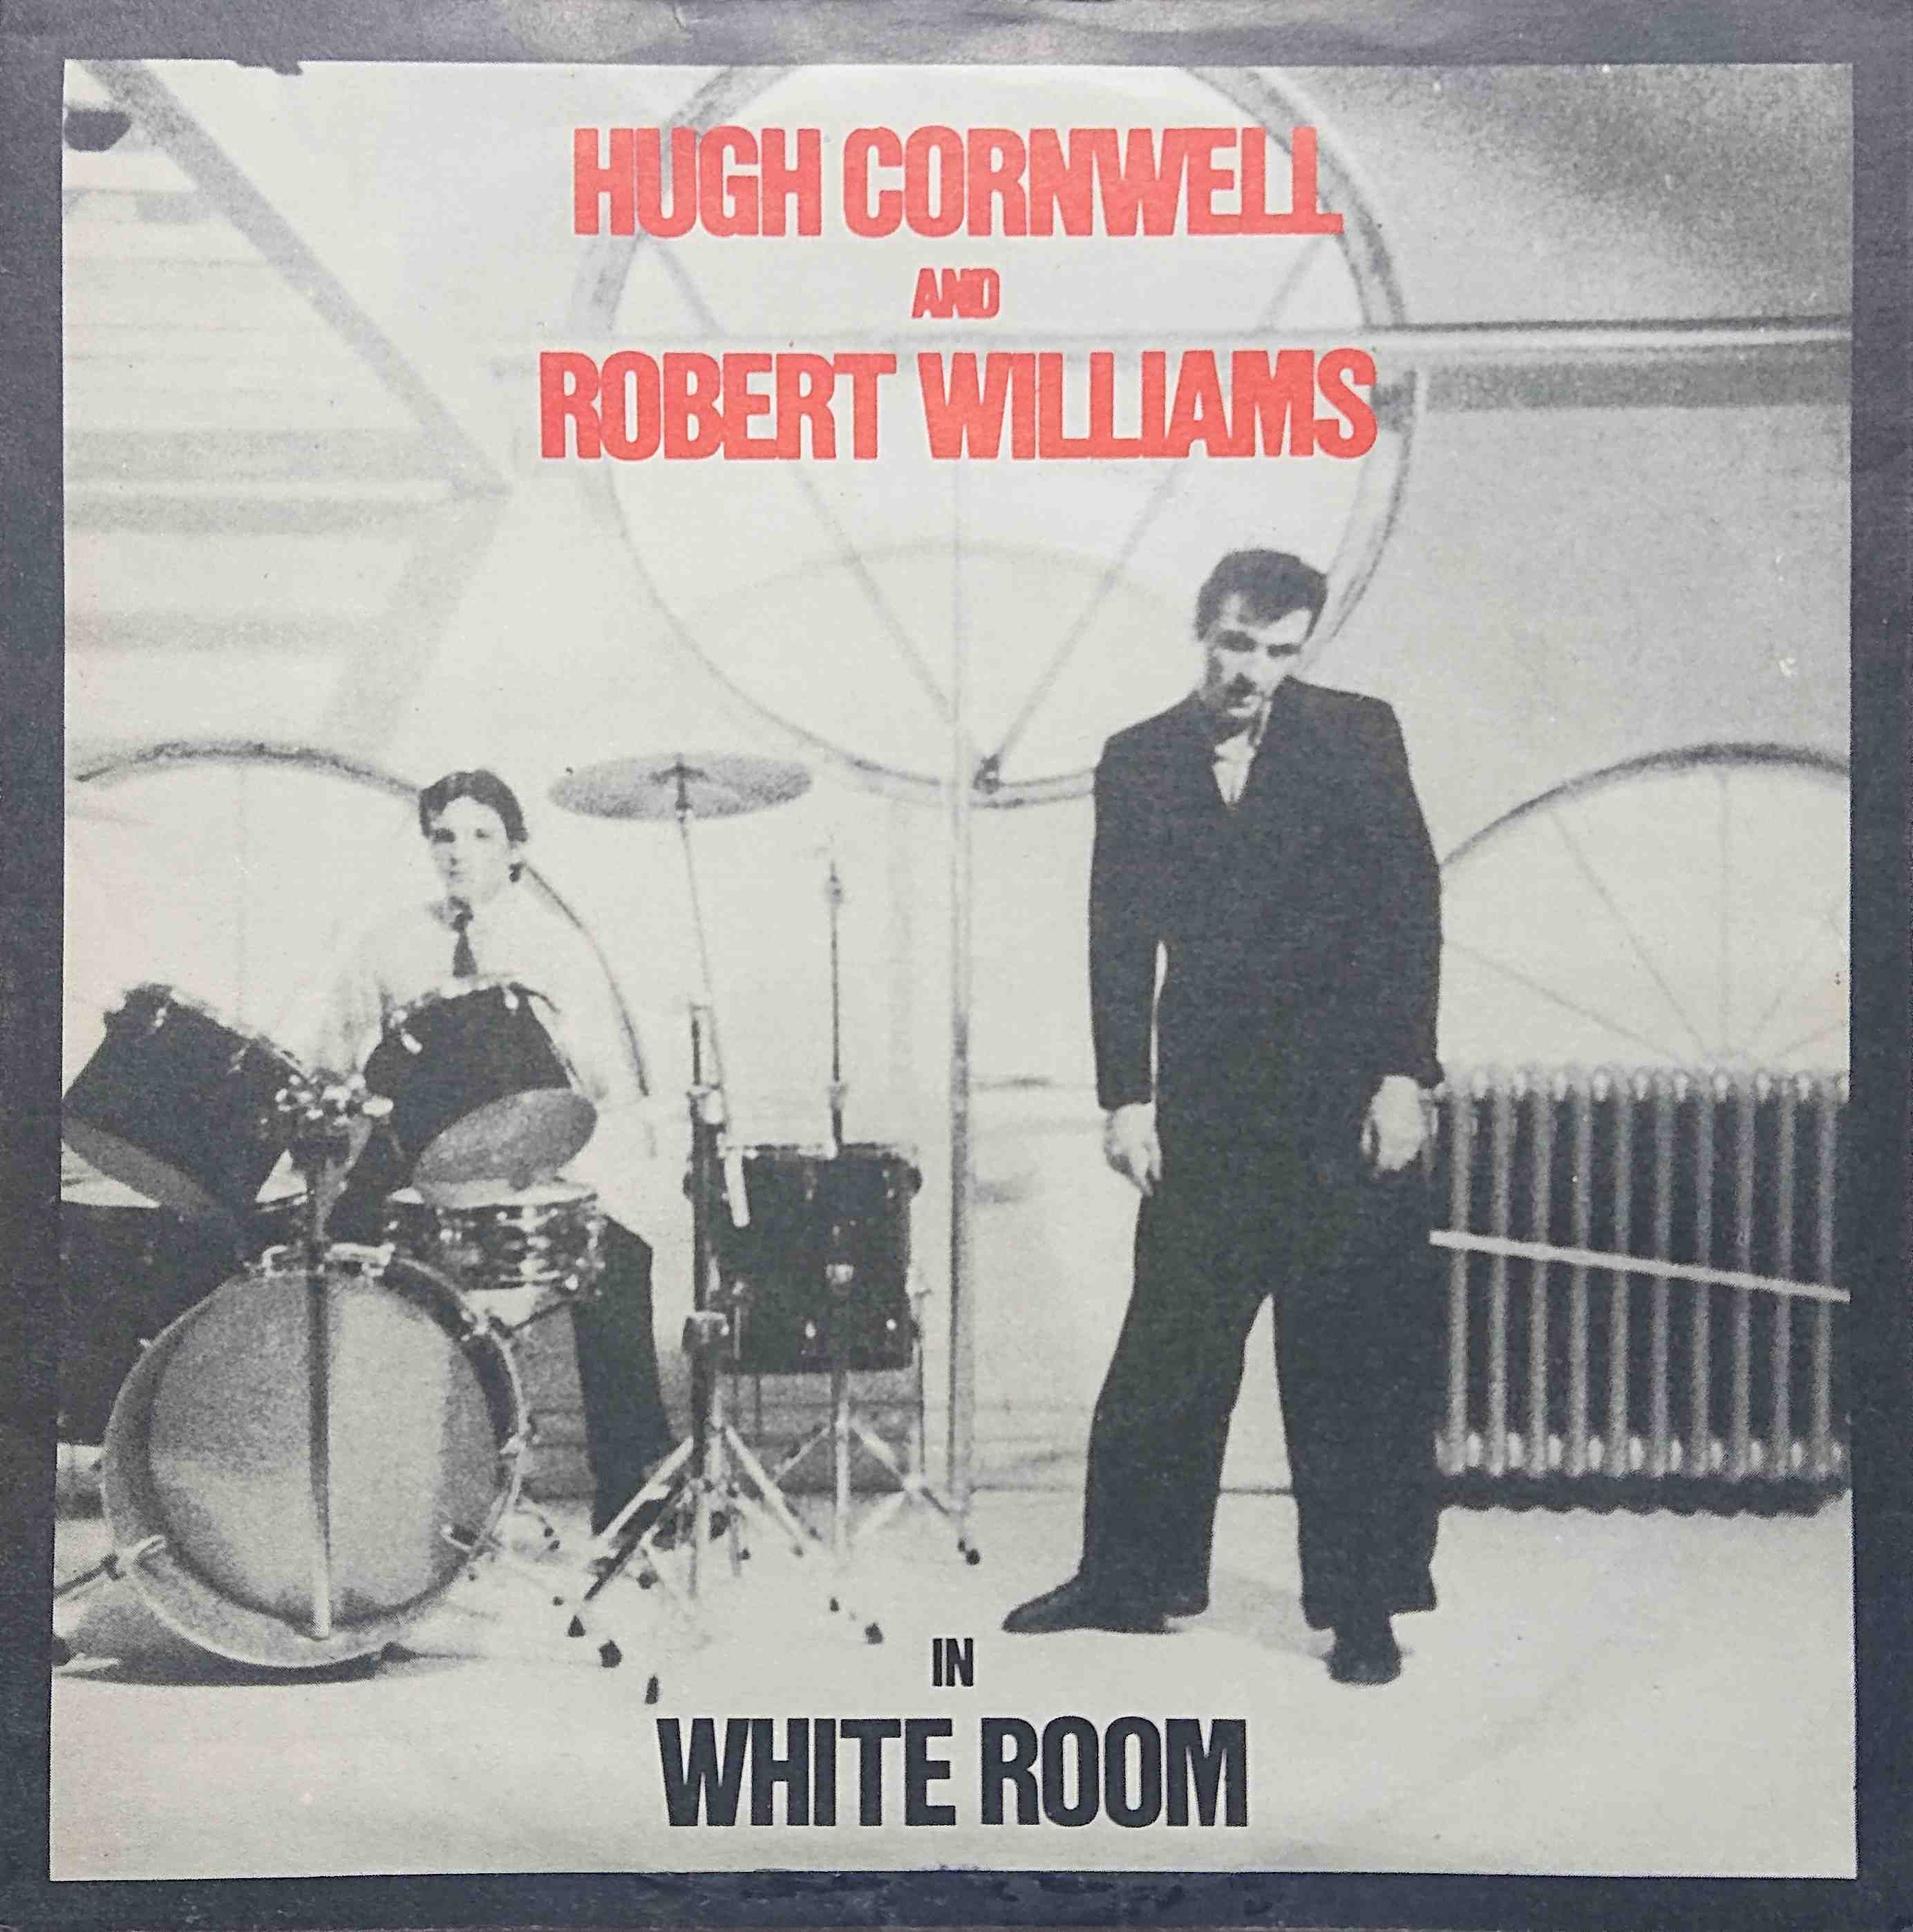 Picture of White room by artist Hugh Cornwell / Robert Williams from The Stranglers singles